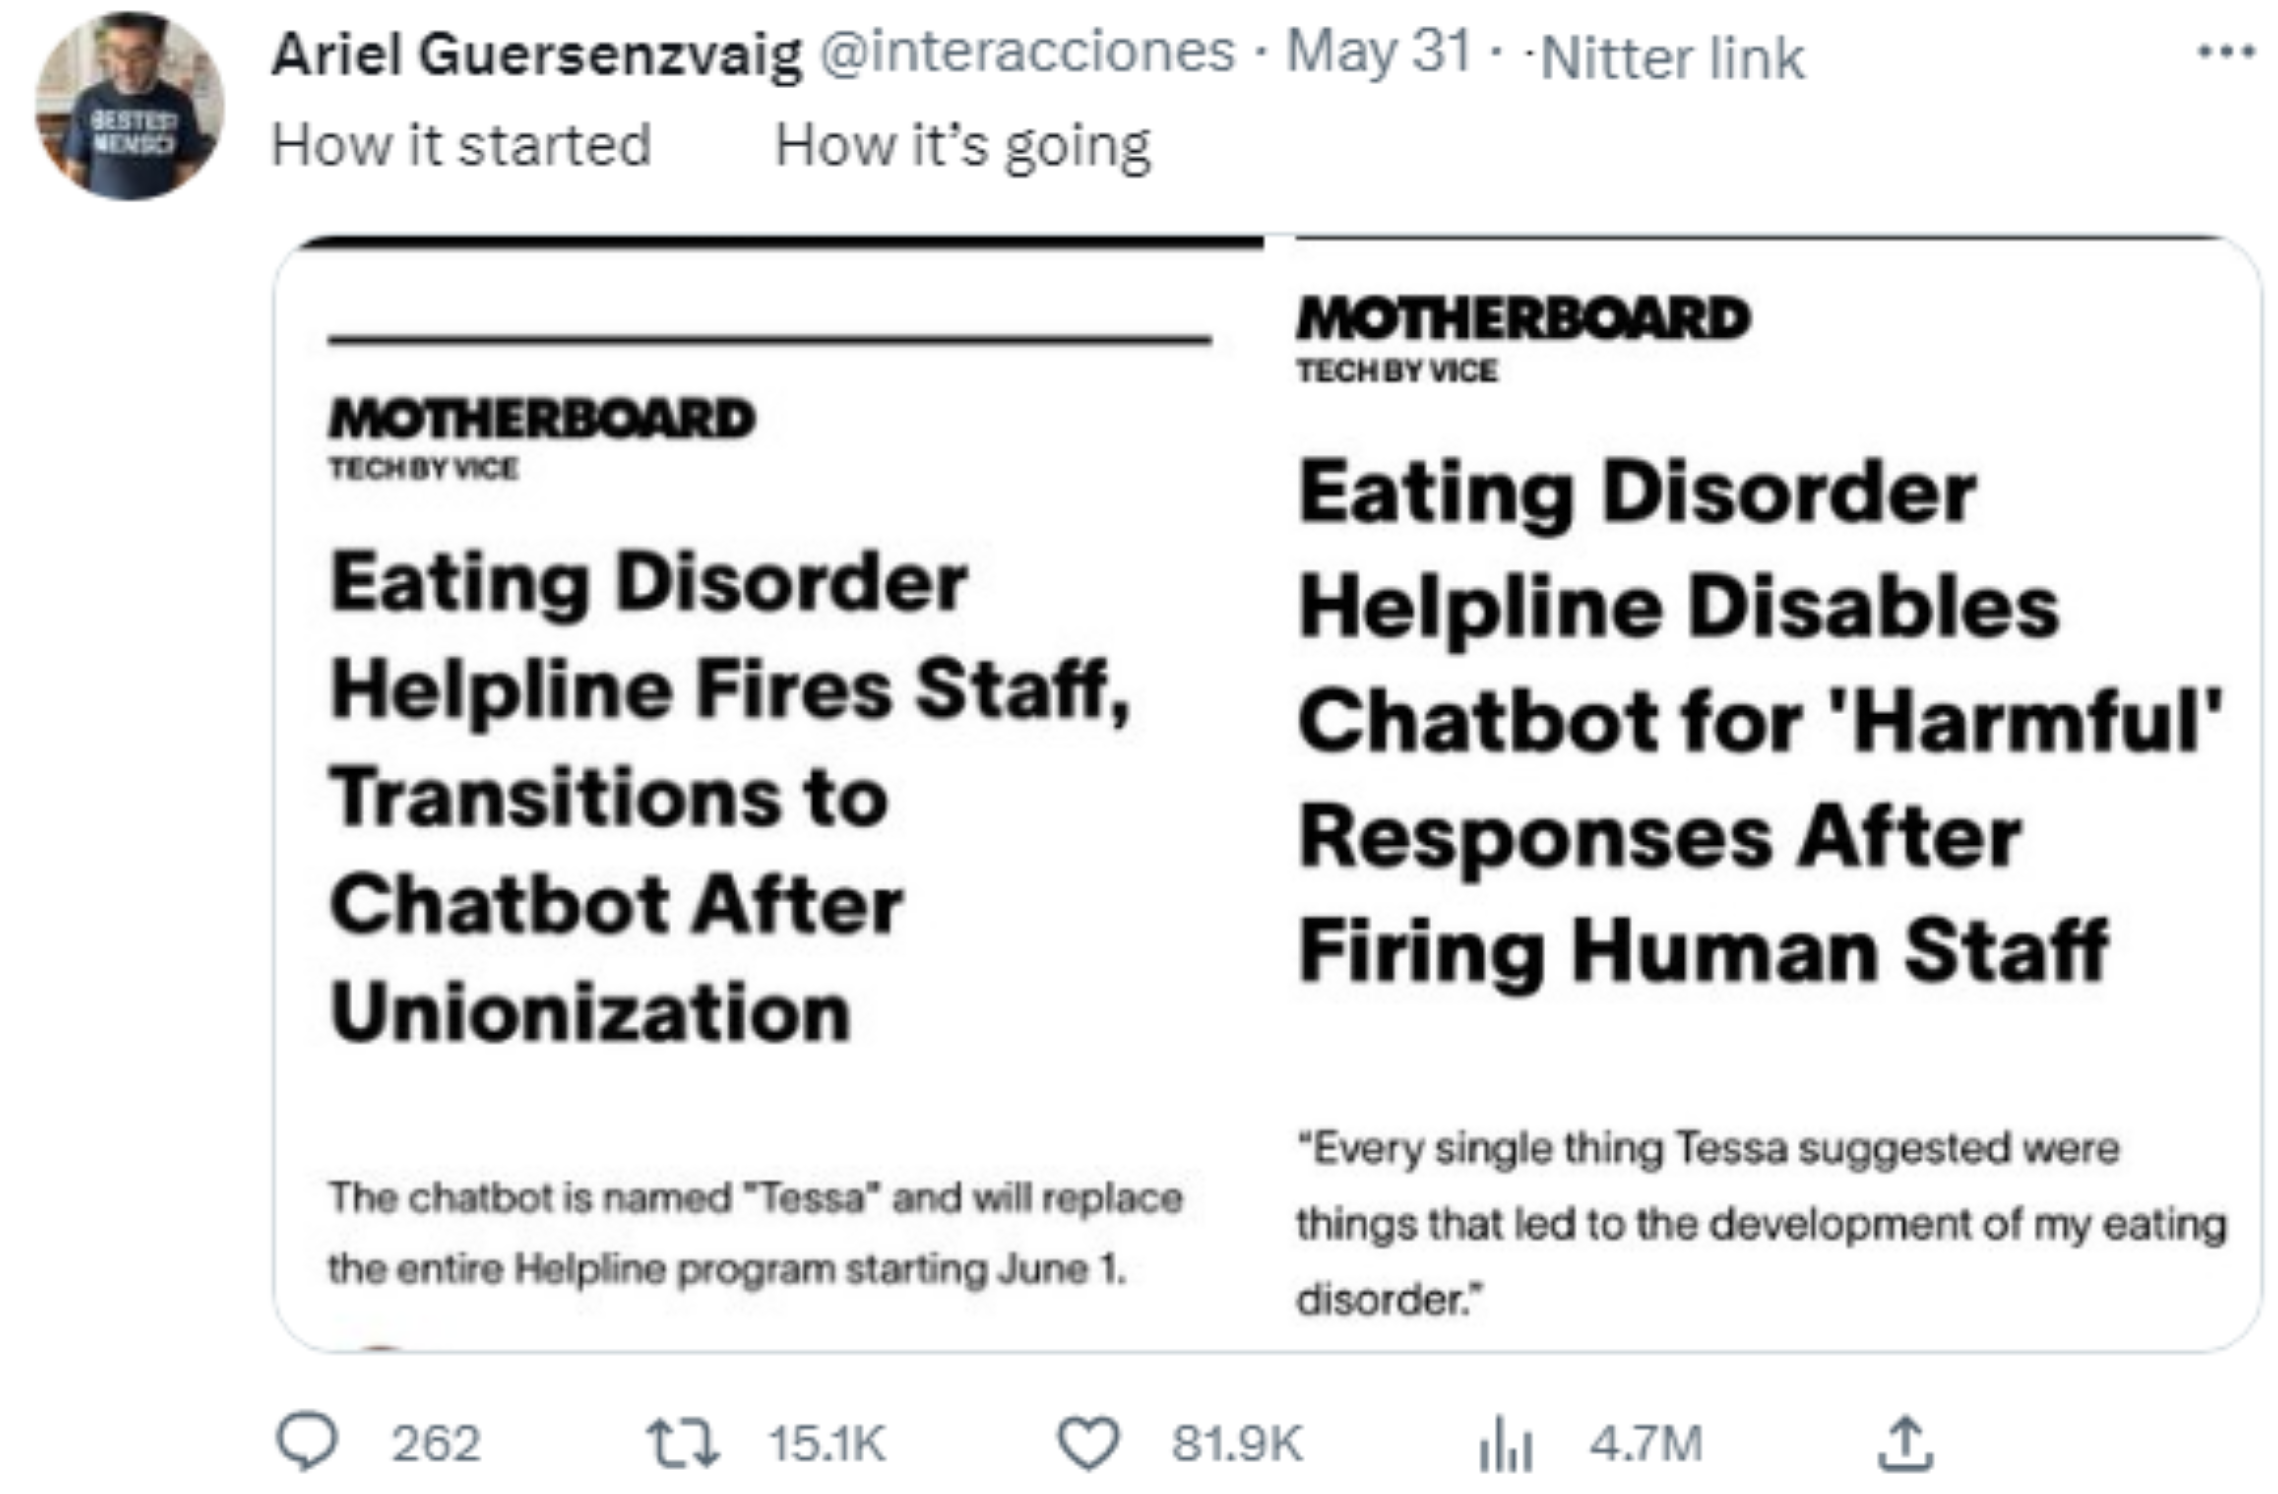 screenshot - Ariel Guersenzvaig May 31 Nitter link How it started How it's going Motherboard Tech By Vice Eating Disorder Helpline Fires Staff, Transitions to Chatbot After Unionization The chatbot is named "Tessa" and will replace the entire Helpline pro